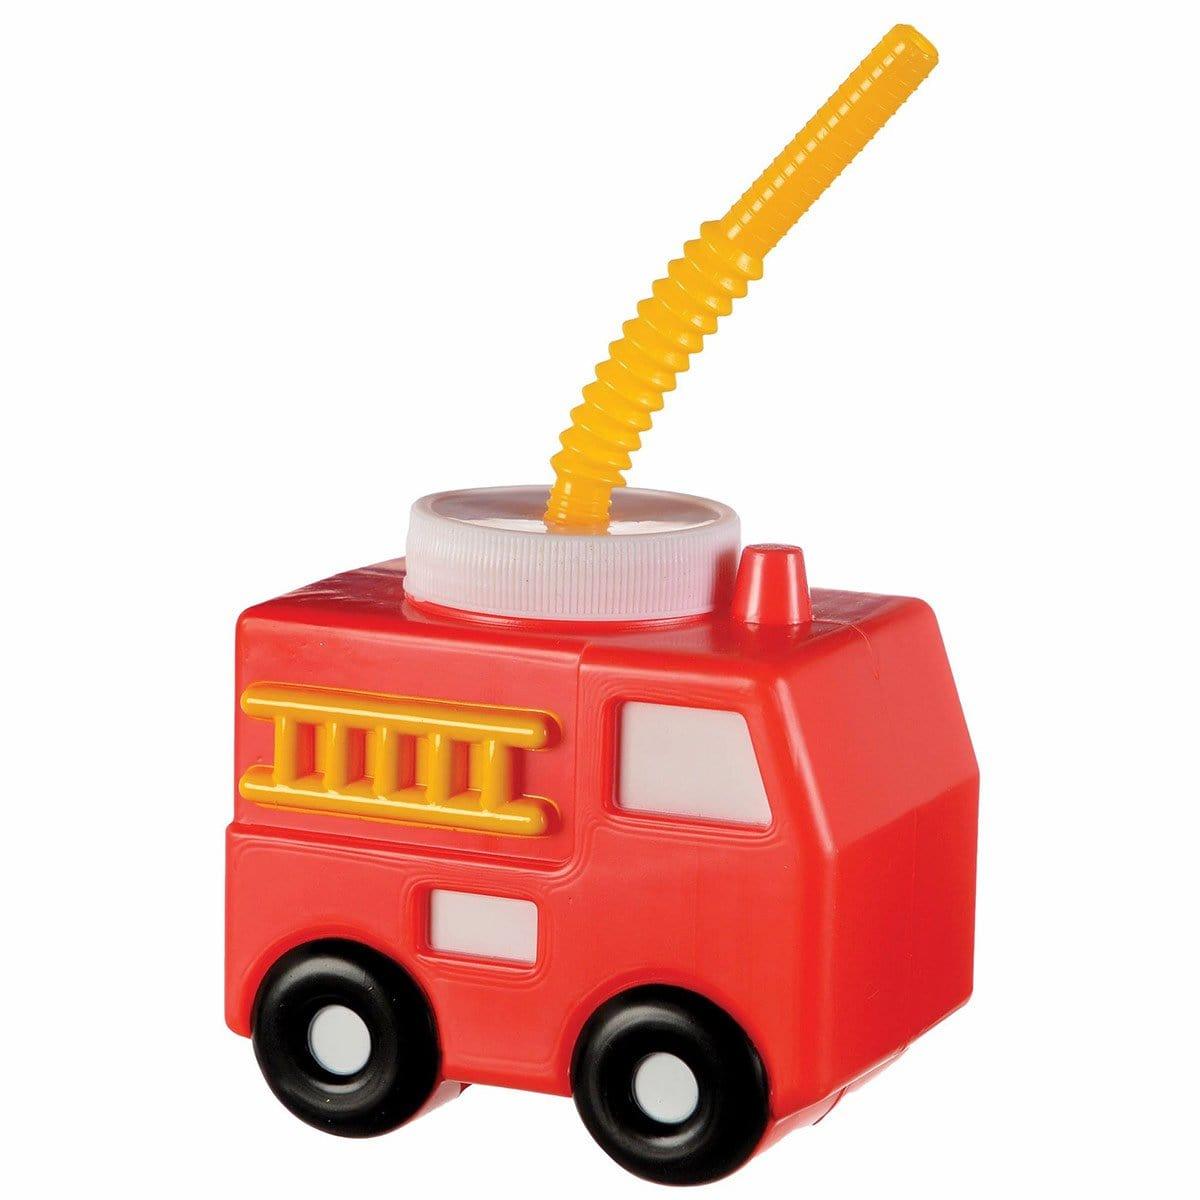 Buy Kids Birthday First Responders Fire Truck Cup sold at Party Expert